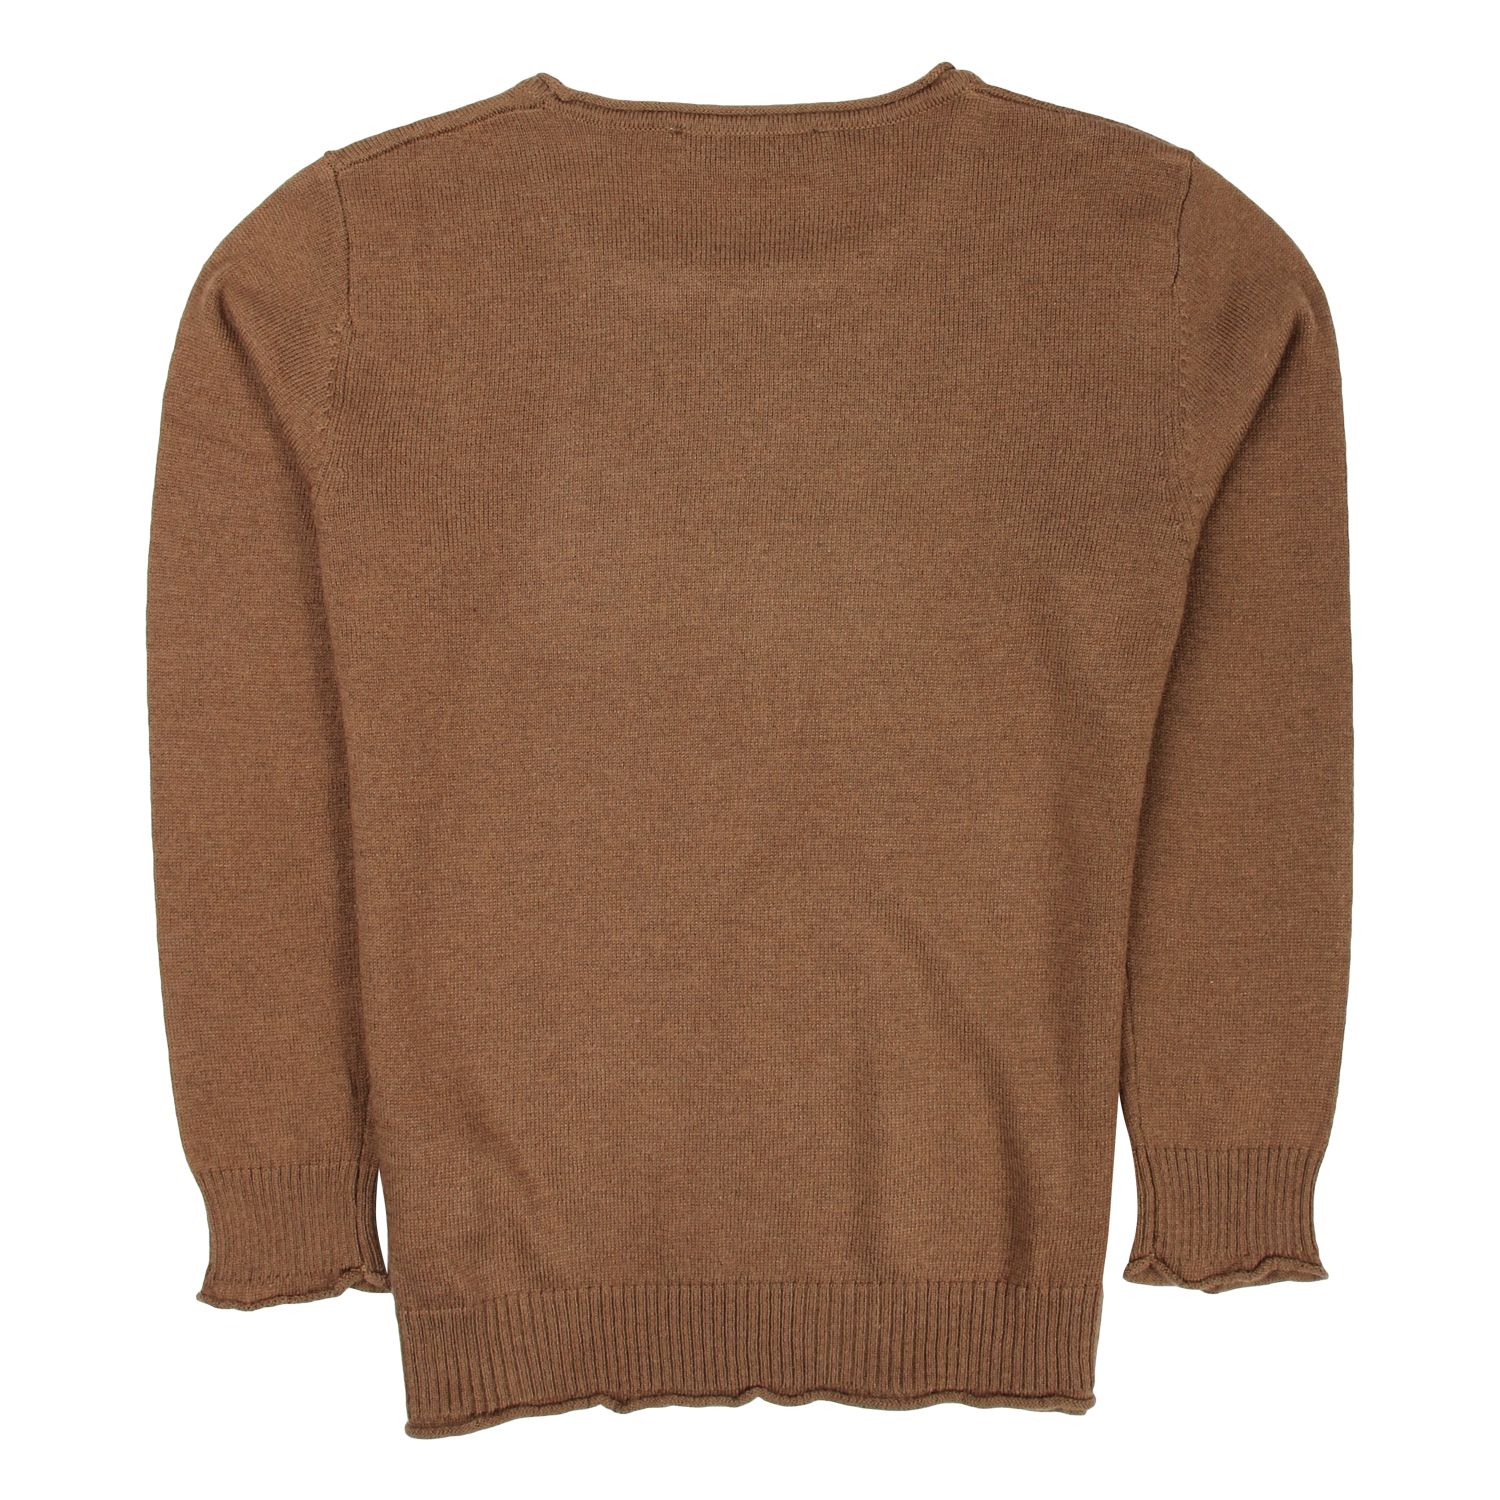 Manuel Ritz black camel sweater -Details of long-sleeved sweater with rolled cuffs, wide neckline, camel-colored bottom, front with black logo, visible in the center, basic back -Hand wash